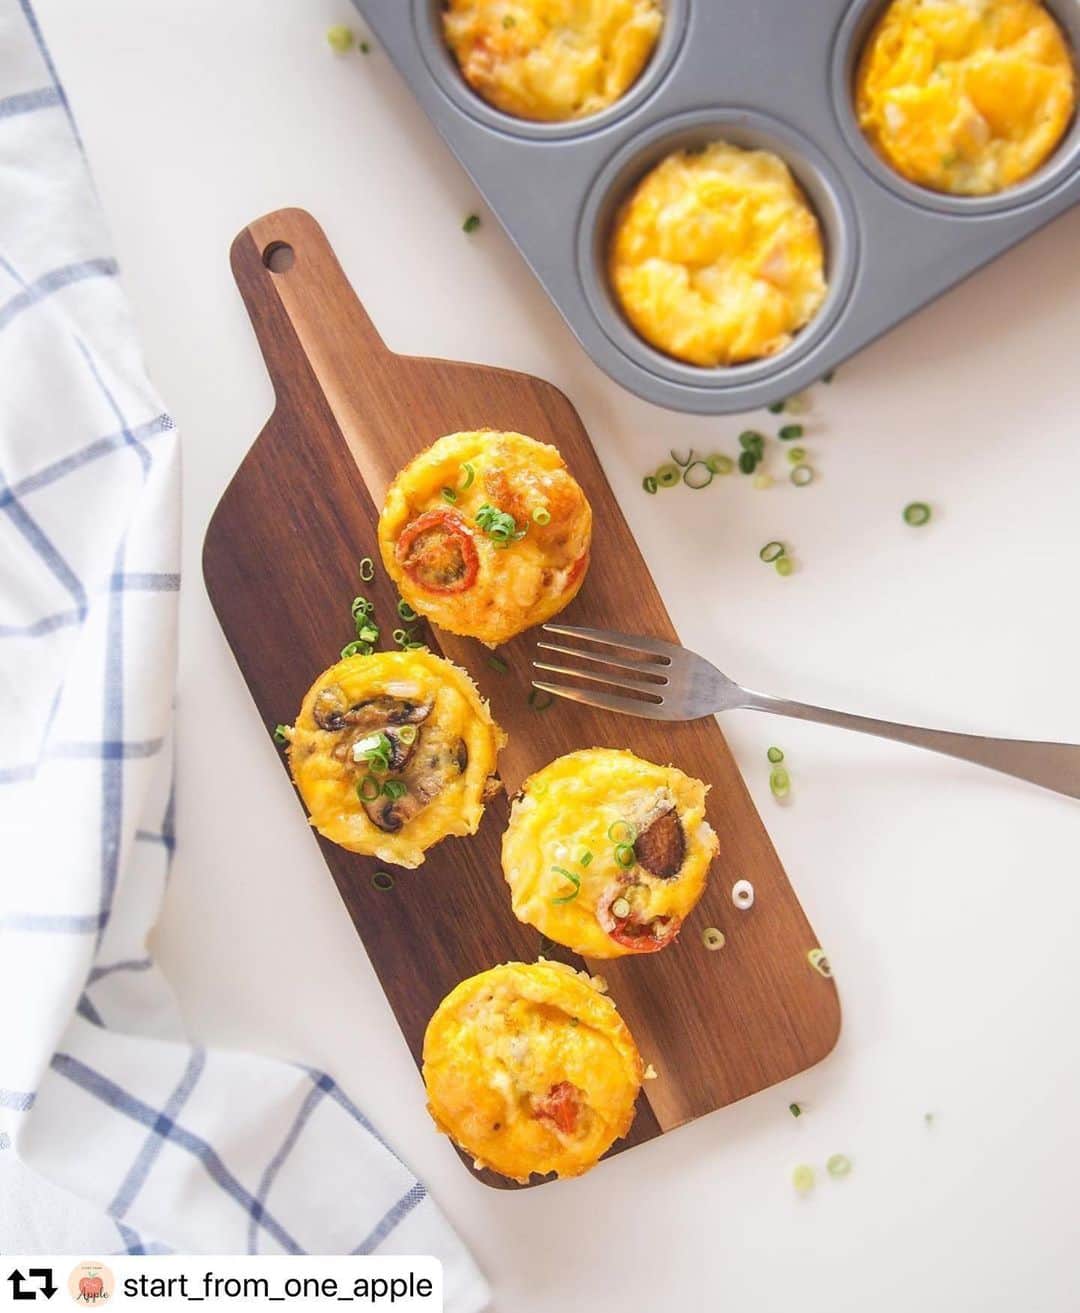 クスパさんのインスタグラム写真 - (クスパInstagram)「#repost @start_from_one_apple ・・・ ****************english below EGG MUFFINS エッグマフィン . 海外で馴染みの多いエッグマフィン★ 食べてほしい具材をマフィン型に入れて 卵を入れ、チーズを好みで入れて焼くだけ。 卵の黄色に野菜の色がすごく綺麗で好きです。 またオリジナルのレシピが作りやすいのも良いですね♪ お弁当に入っていてもすごくかわいいです。 . 私はハム、コーン、ねぎ、ジャスミンライスと マッシュルーム、トマト、ジャスミンライスにしました。 作り方や材料はブログのLunchのレシピに載せていますので是非チェックしてみてください。 . This is also a menu that I love to see from moms in different countries.  They are so colorful and beautiful! And you can put any ingredients you want. Good to hide veggies. . Today I put ... ・Ham,corn,green onions+jasmine rice ・Tomatoes, brown mushrooms + jasmine rice . I used 7 eggs+7 tablespoons of soymilk  to make 12 muffins. 180℃30mins. . When I mixed the egg, I added garlic powder and cumin. How do you like making these egg muffins?? Please give me comments.That would be helpful!! . #healthykidsfood #whatifeedmykid #kidslunchideas #簡単レシピ #幼児食 #幼児食献立 #幼児食レシピ #ヘルシーレシピ #ヘルシーごはん #エッグマフィン #野菜嫌い #マフィン #おかずマフィン #卵料理 #卵焼きアレンジ #お昼ごはん #お弁当おかず #手掴み食べ #手掴み食べメニュー #海外の幼児食 #海外のレシピ #海外の料理 #バイリンガル育児 #マカロニメイト #クスパ #c_i_japan #wp_deli_recipe」6月24日 10時53分 - cookingschoolpark